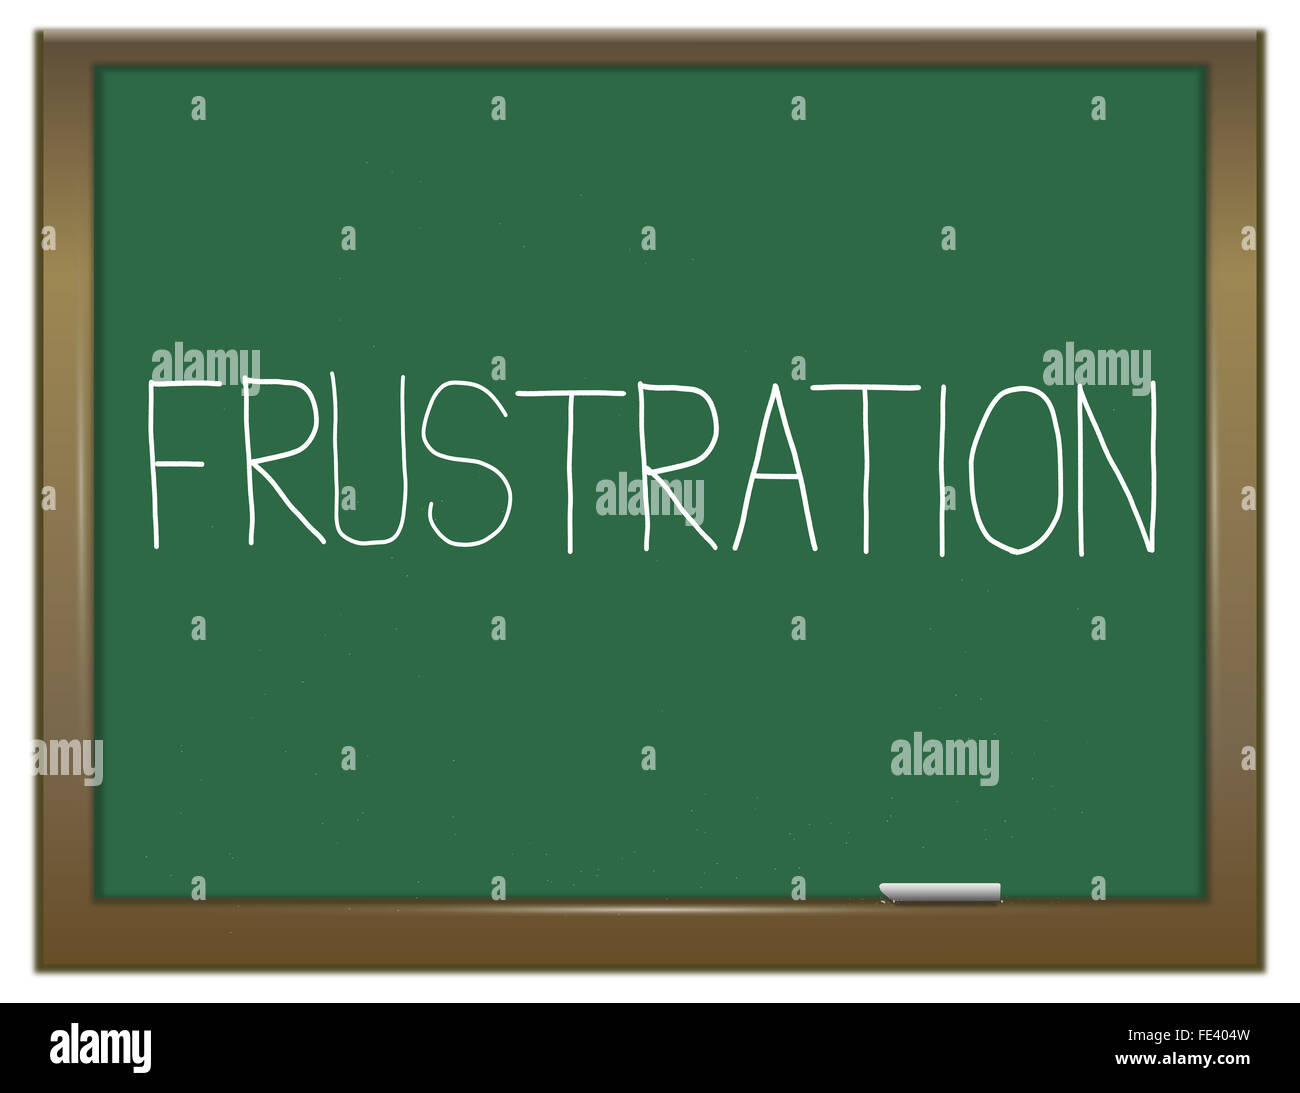 Frustration concept. Stock Photo